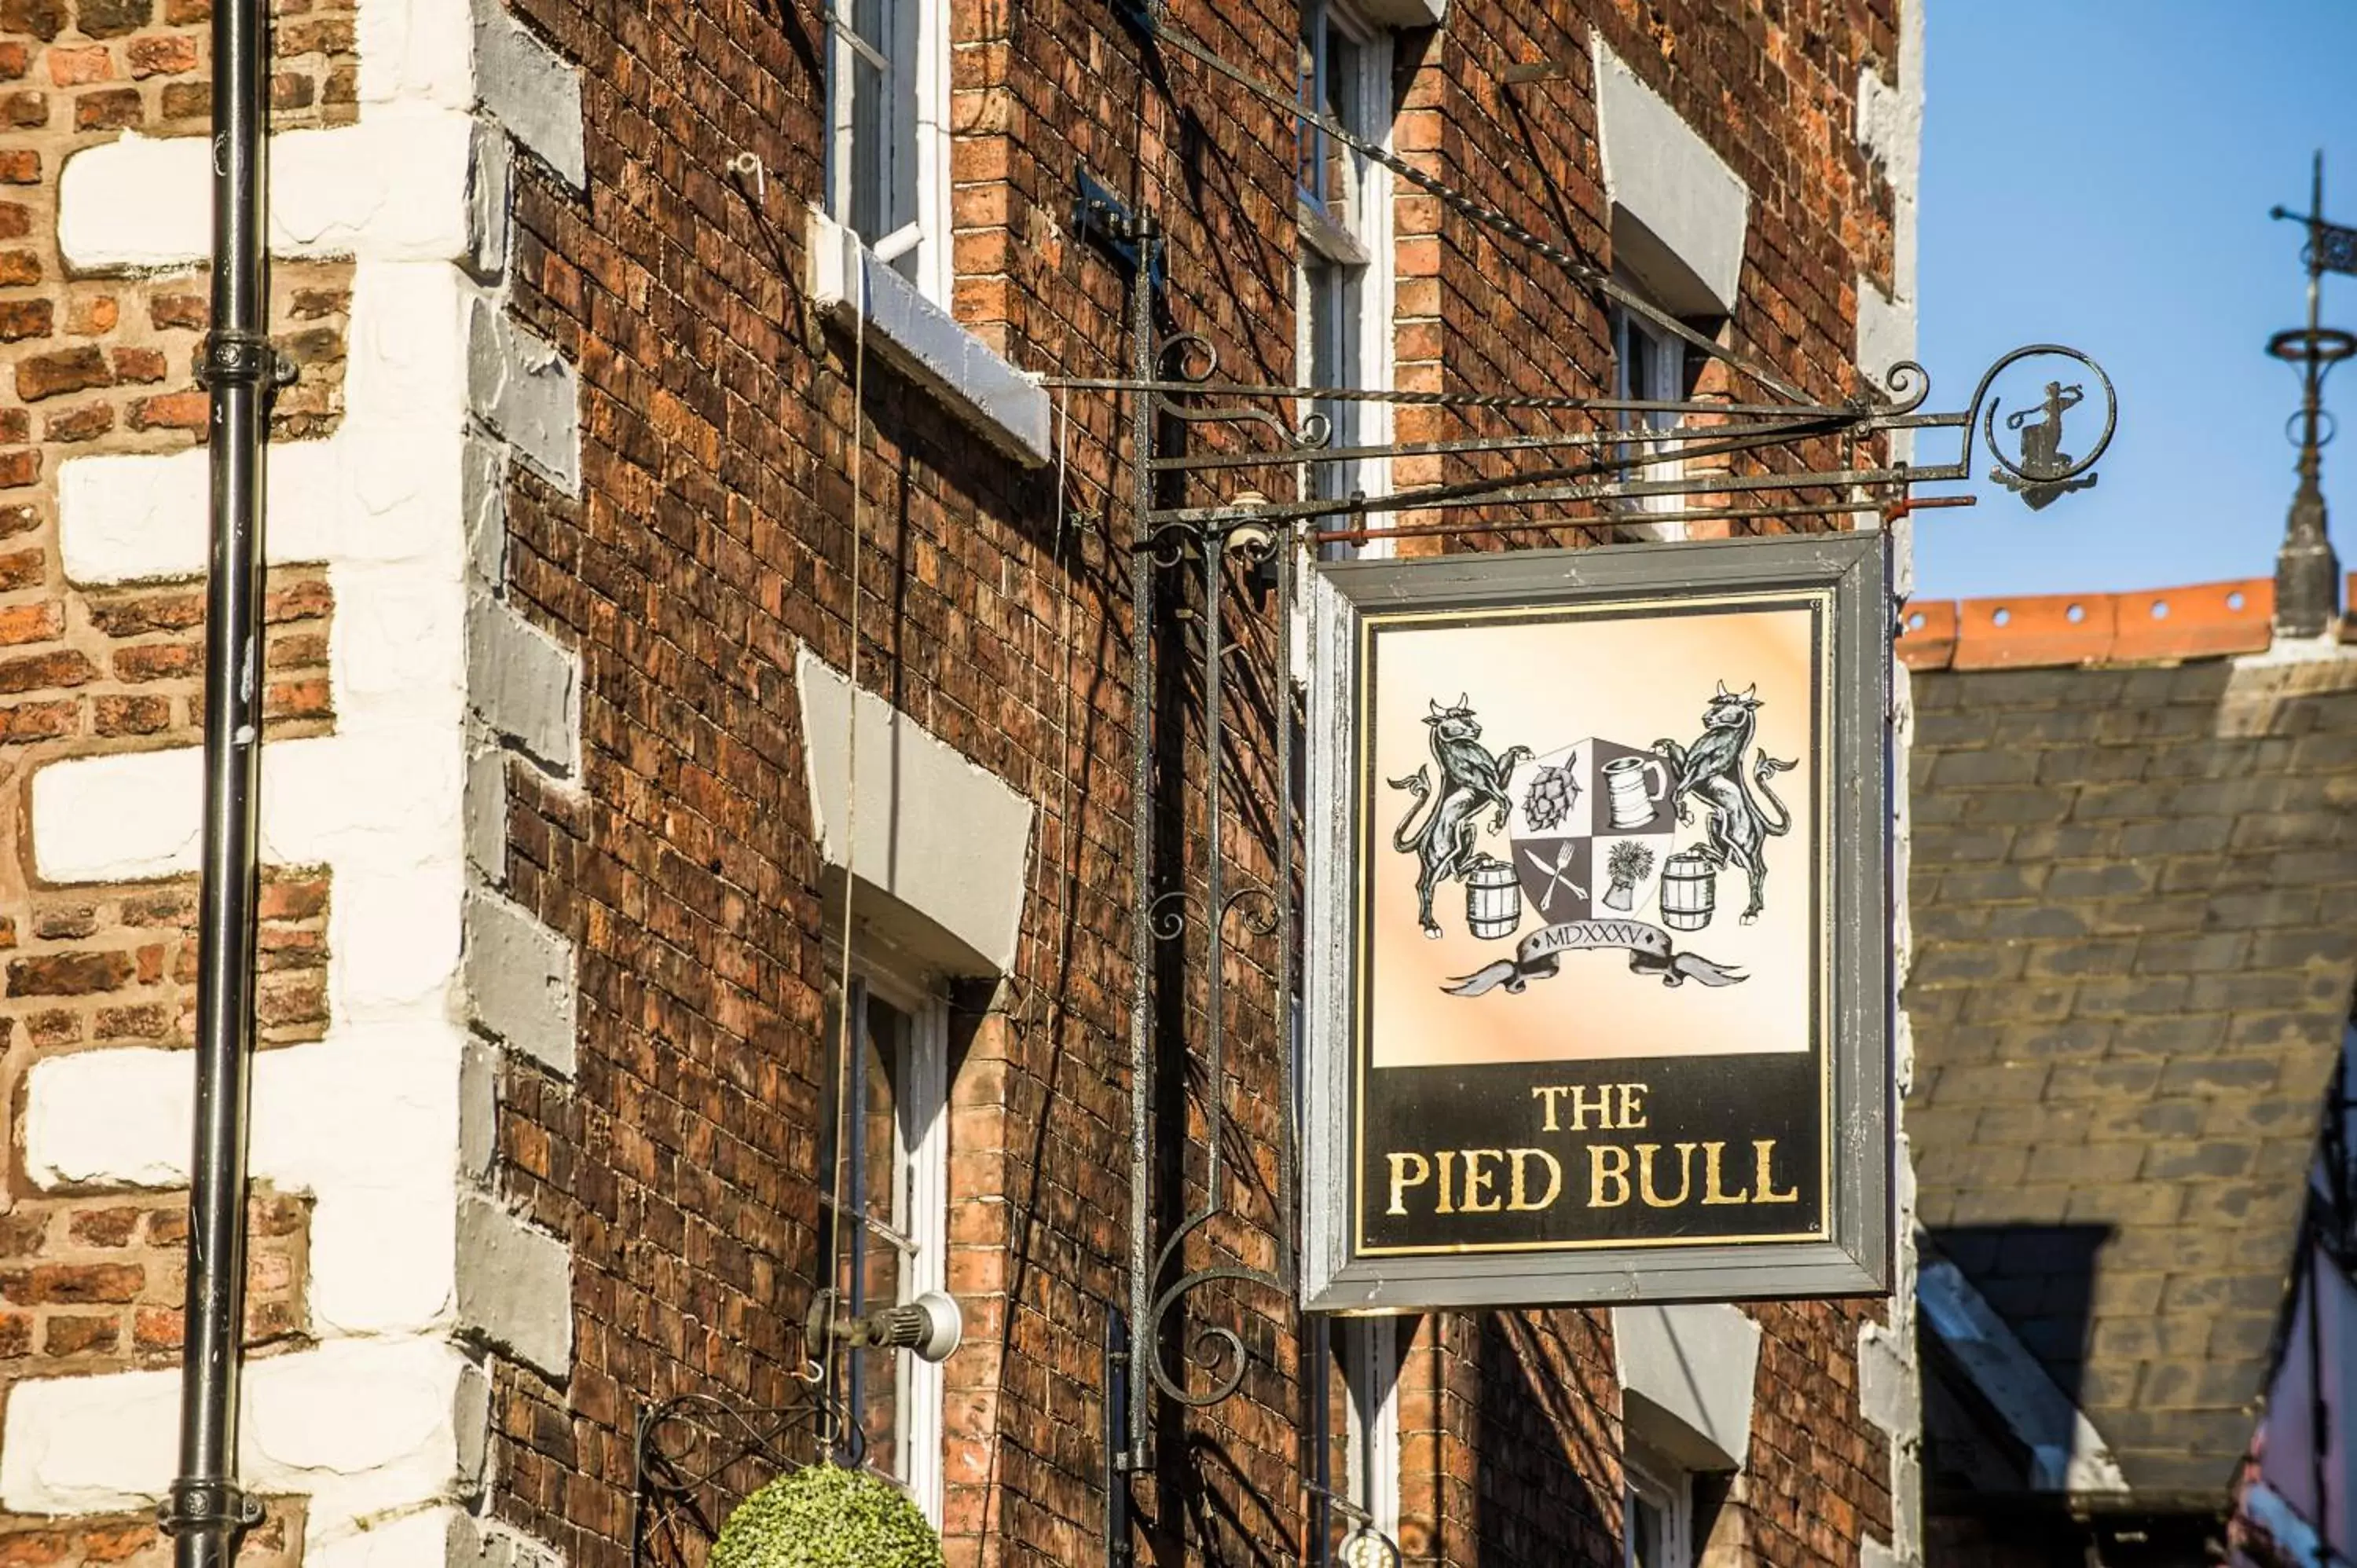 Property building in The Pied Bull